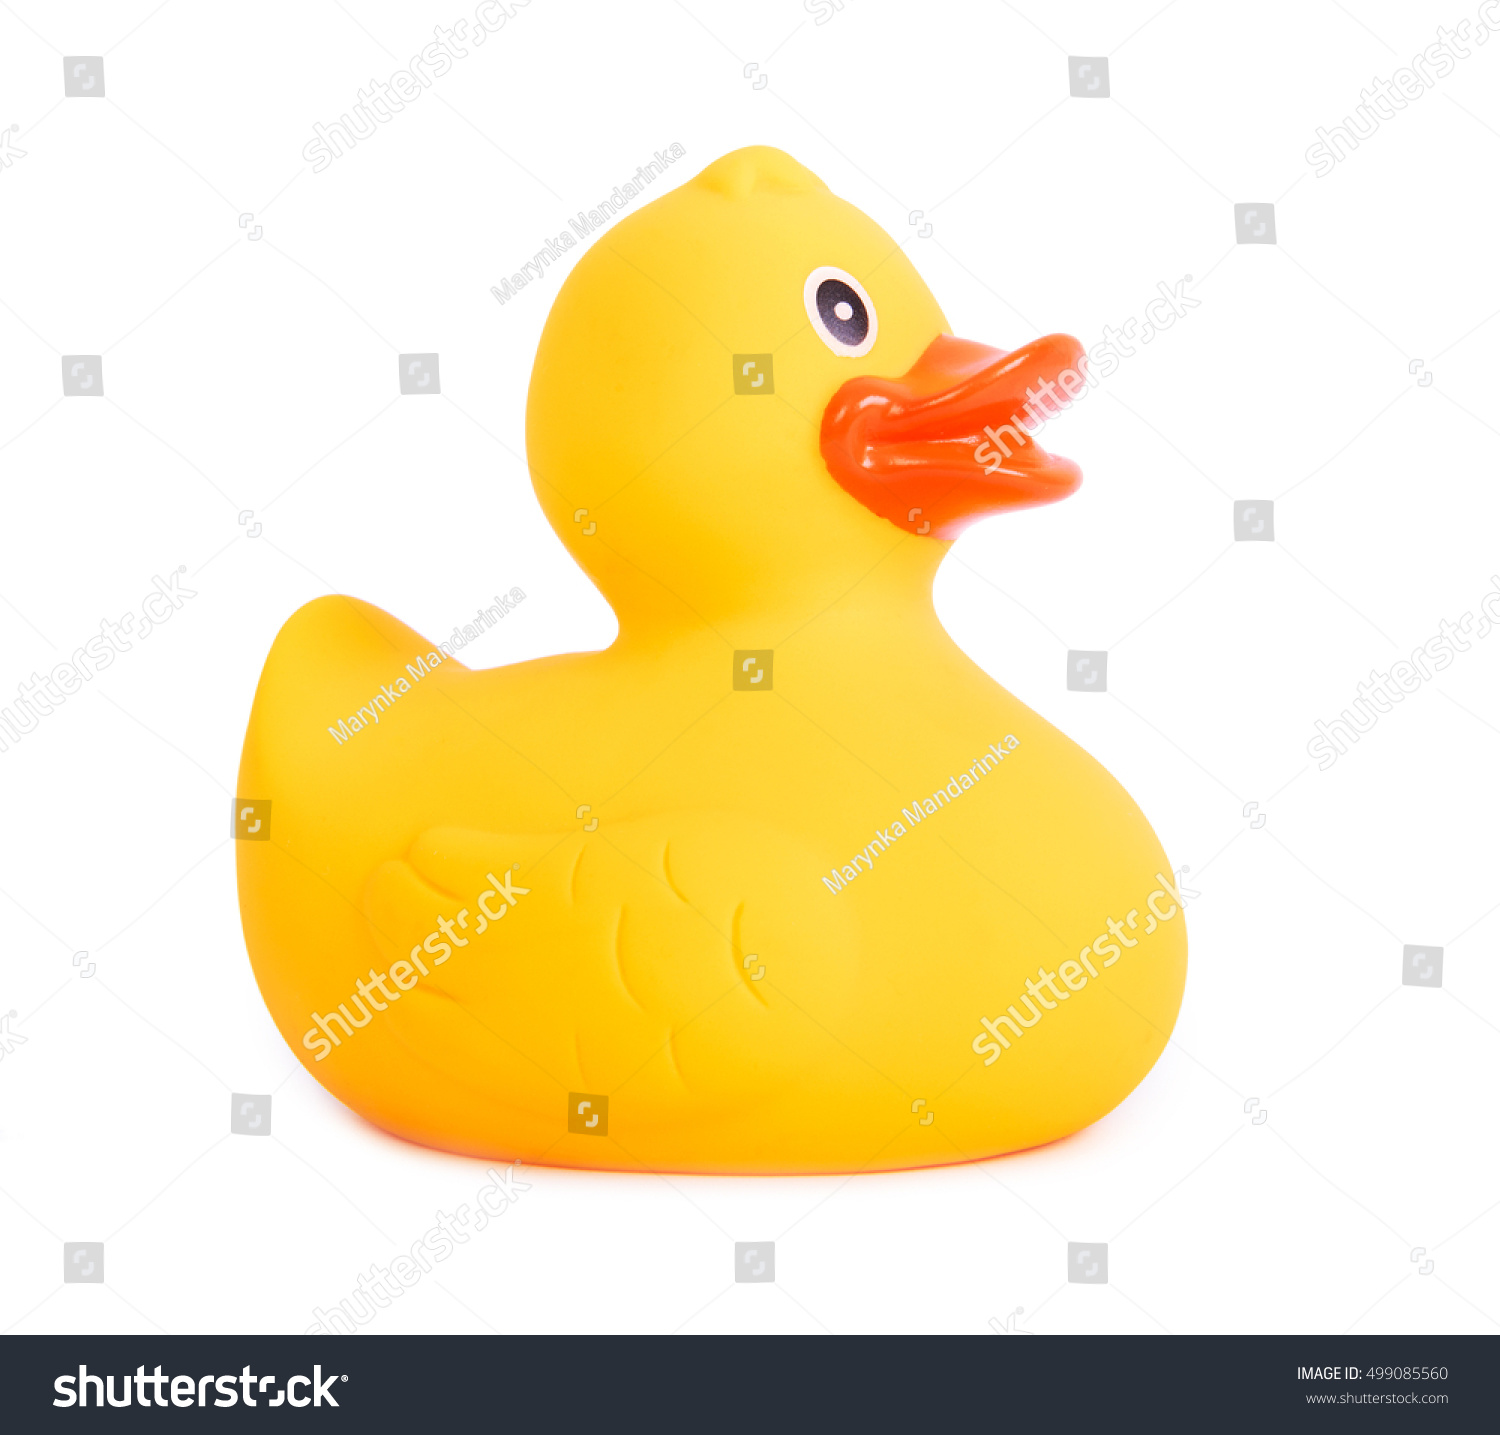 Rubber duck yellow toy for swimming isolated on white background #499085560